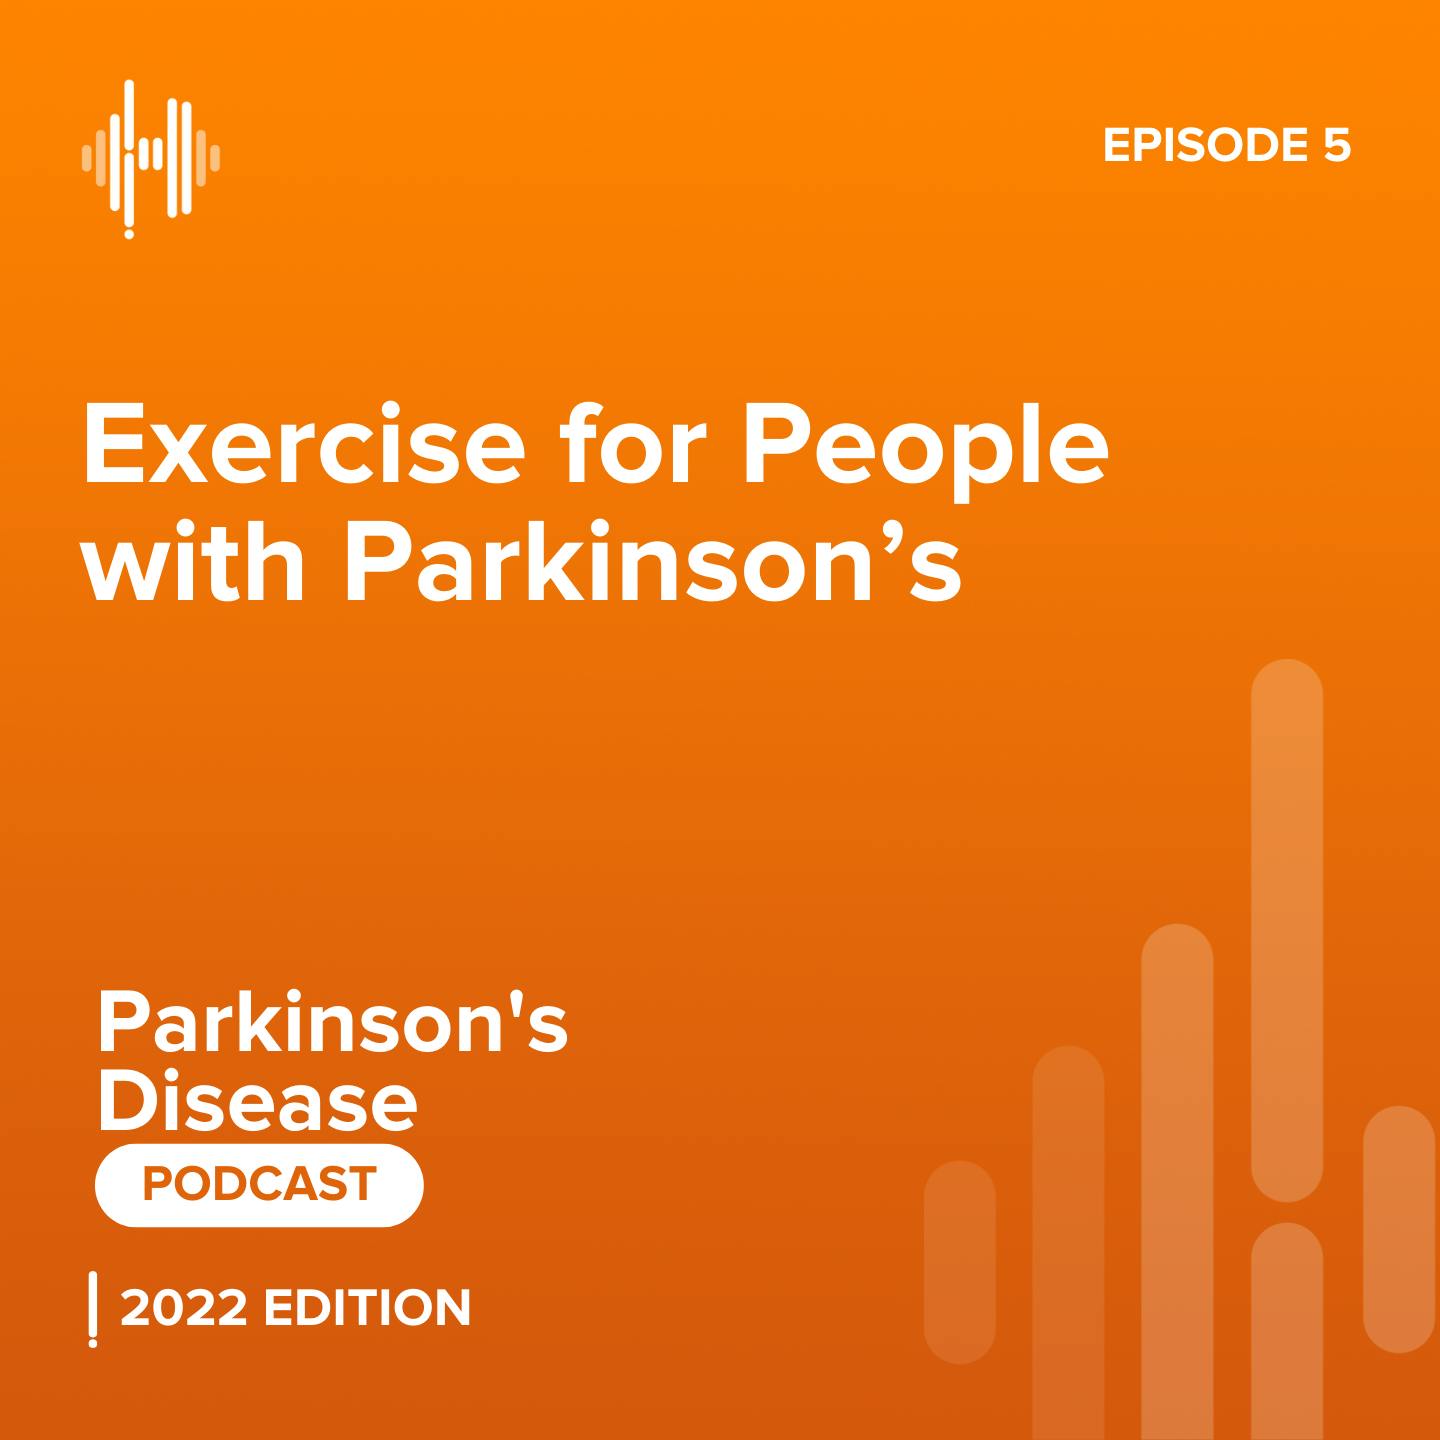 Ep 5: Exercise for People with Parkinson’s – From the Gym to Physical Therapy